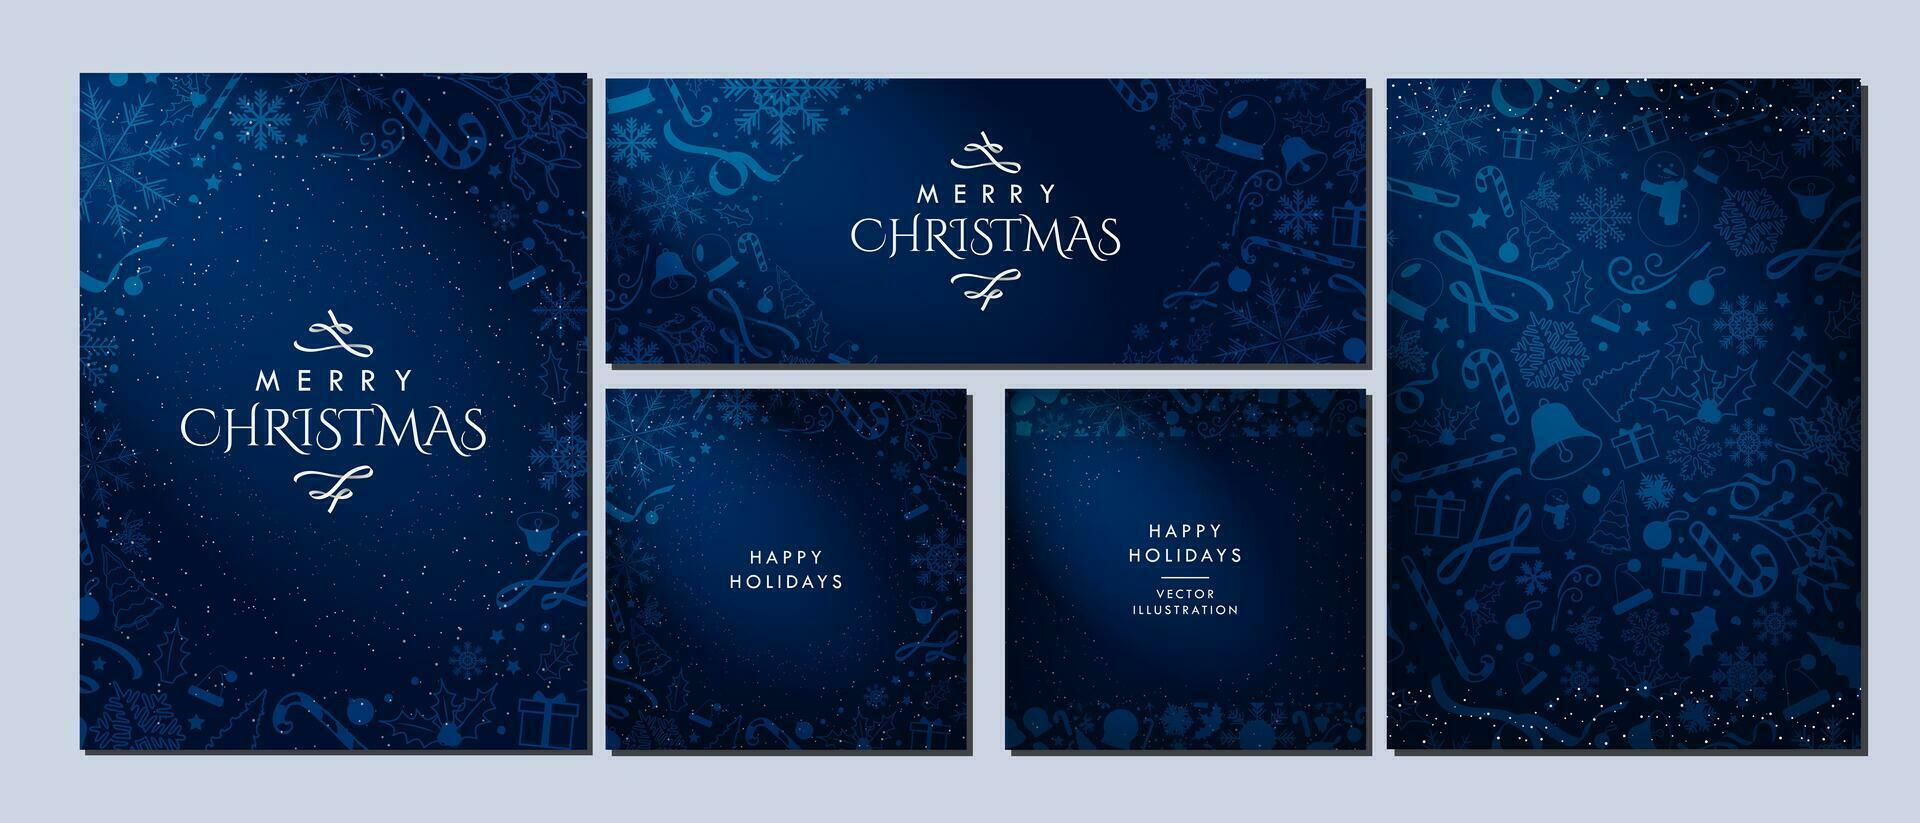 Stylish Christmas theme Backgrounds in gradient midnight blue and yellow, decorated with Blue Christmas elements. Beautiful minimalist Winter templates. Card, banners, posters. Vector Illustration.